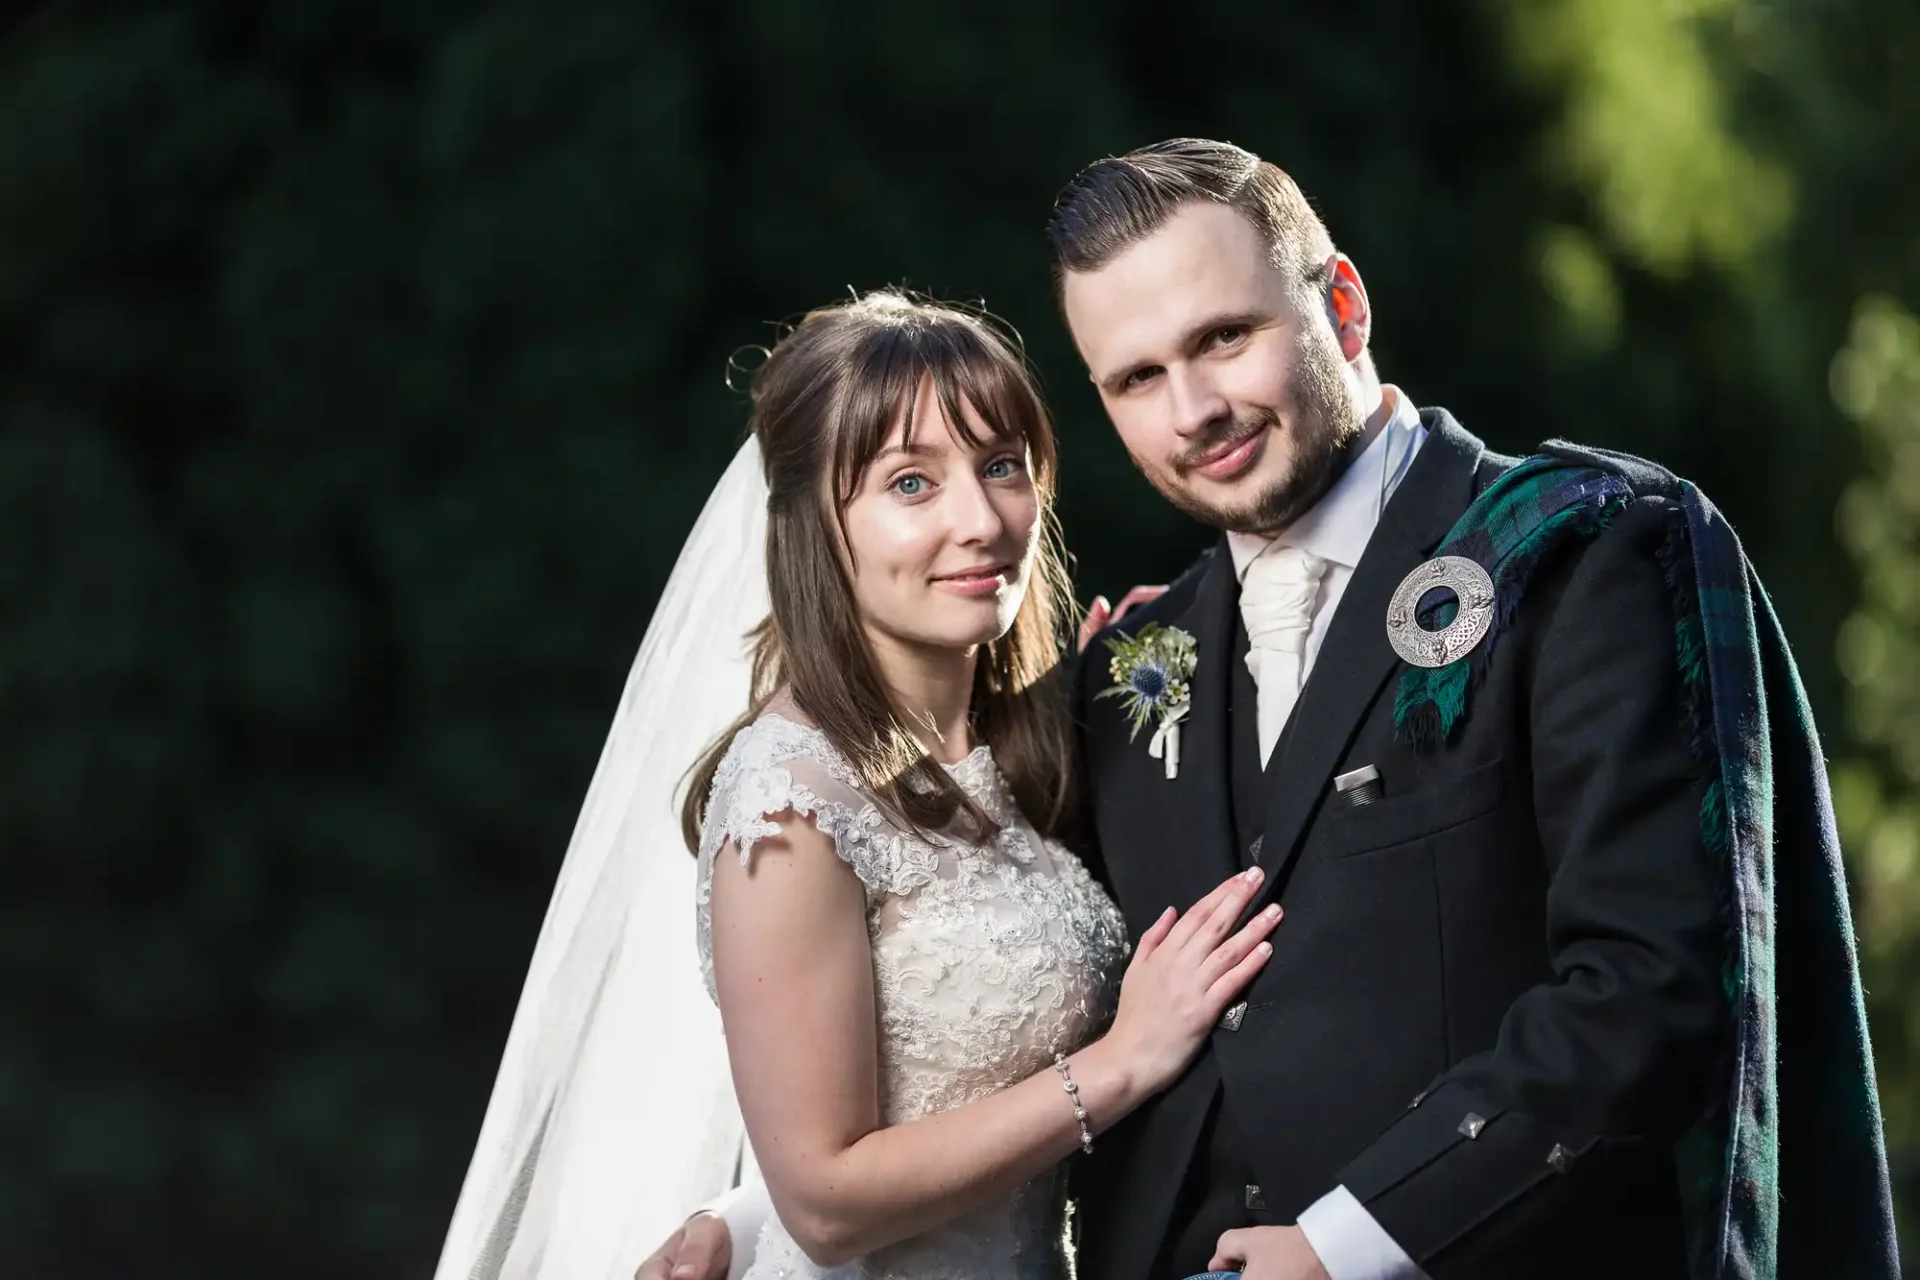 A bride in a white dress and a groom in a traditional kilt posing outdoors, with a green background.